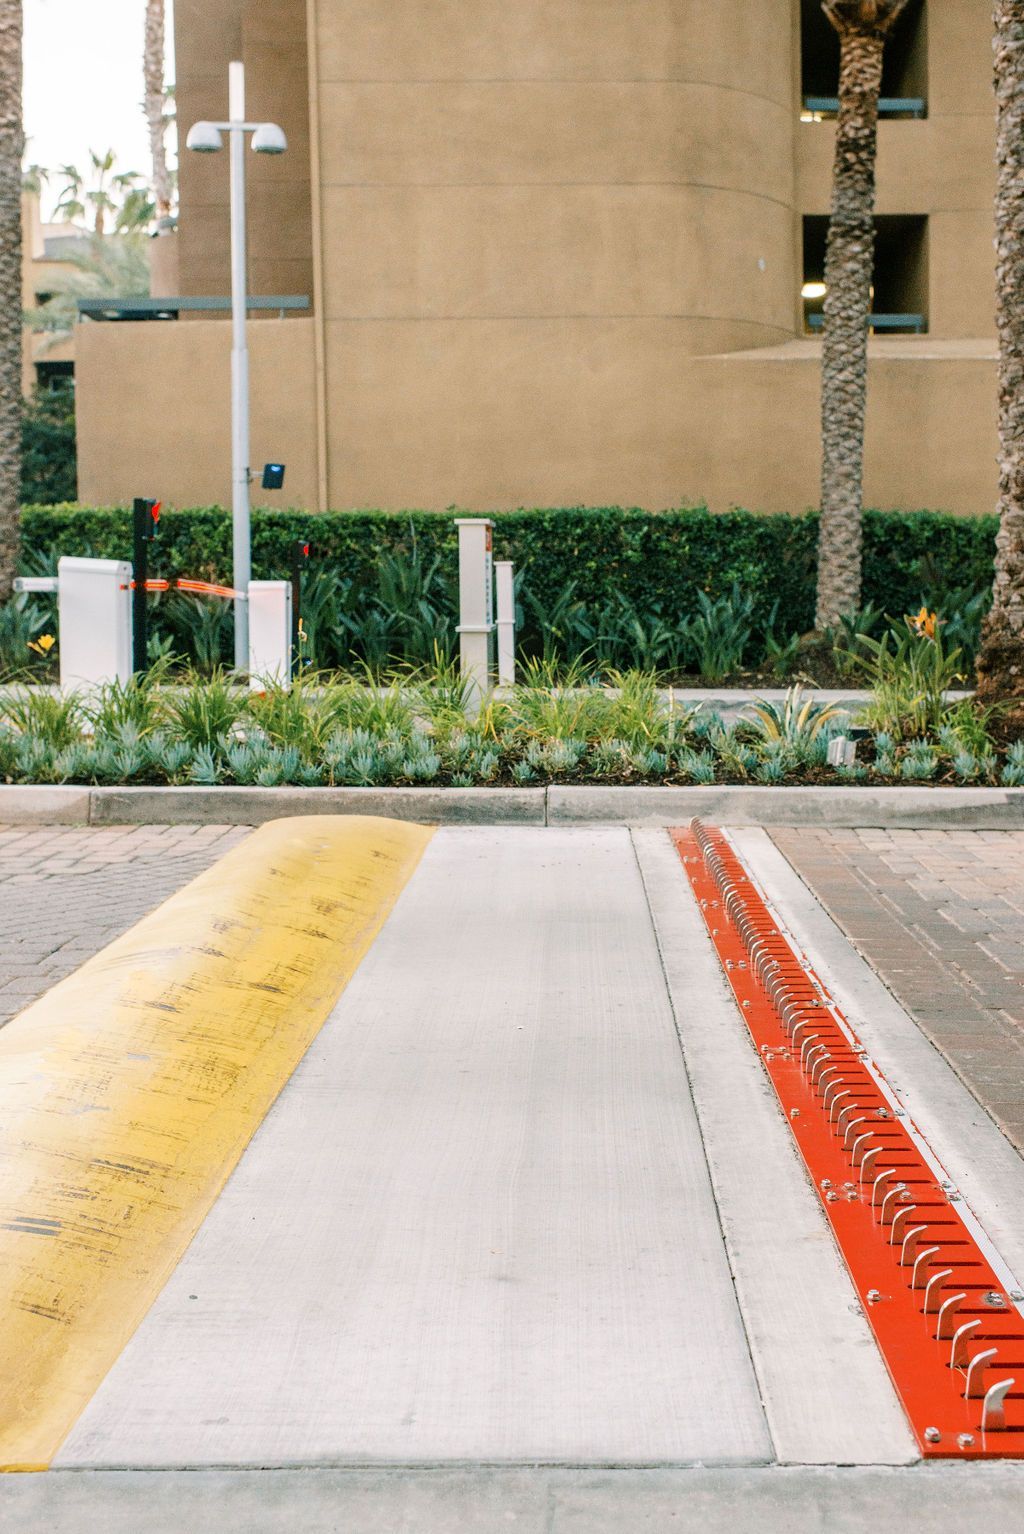 a parking lot with a yellow line and a red barrier